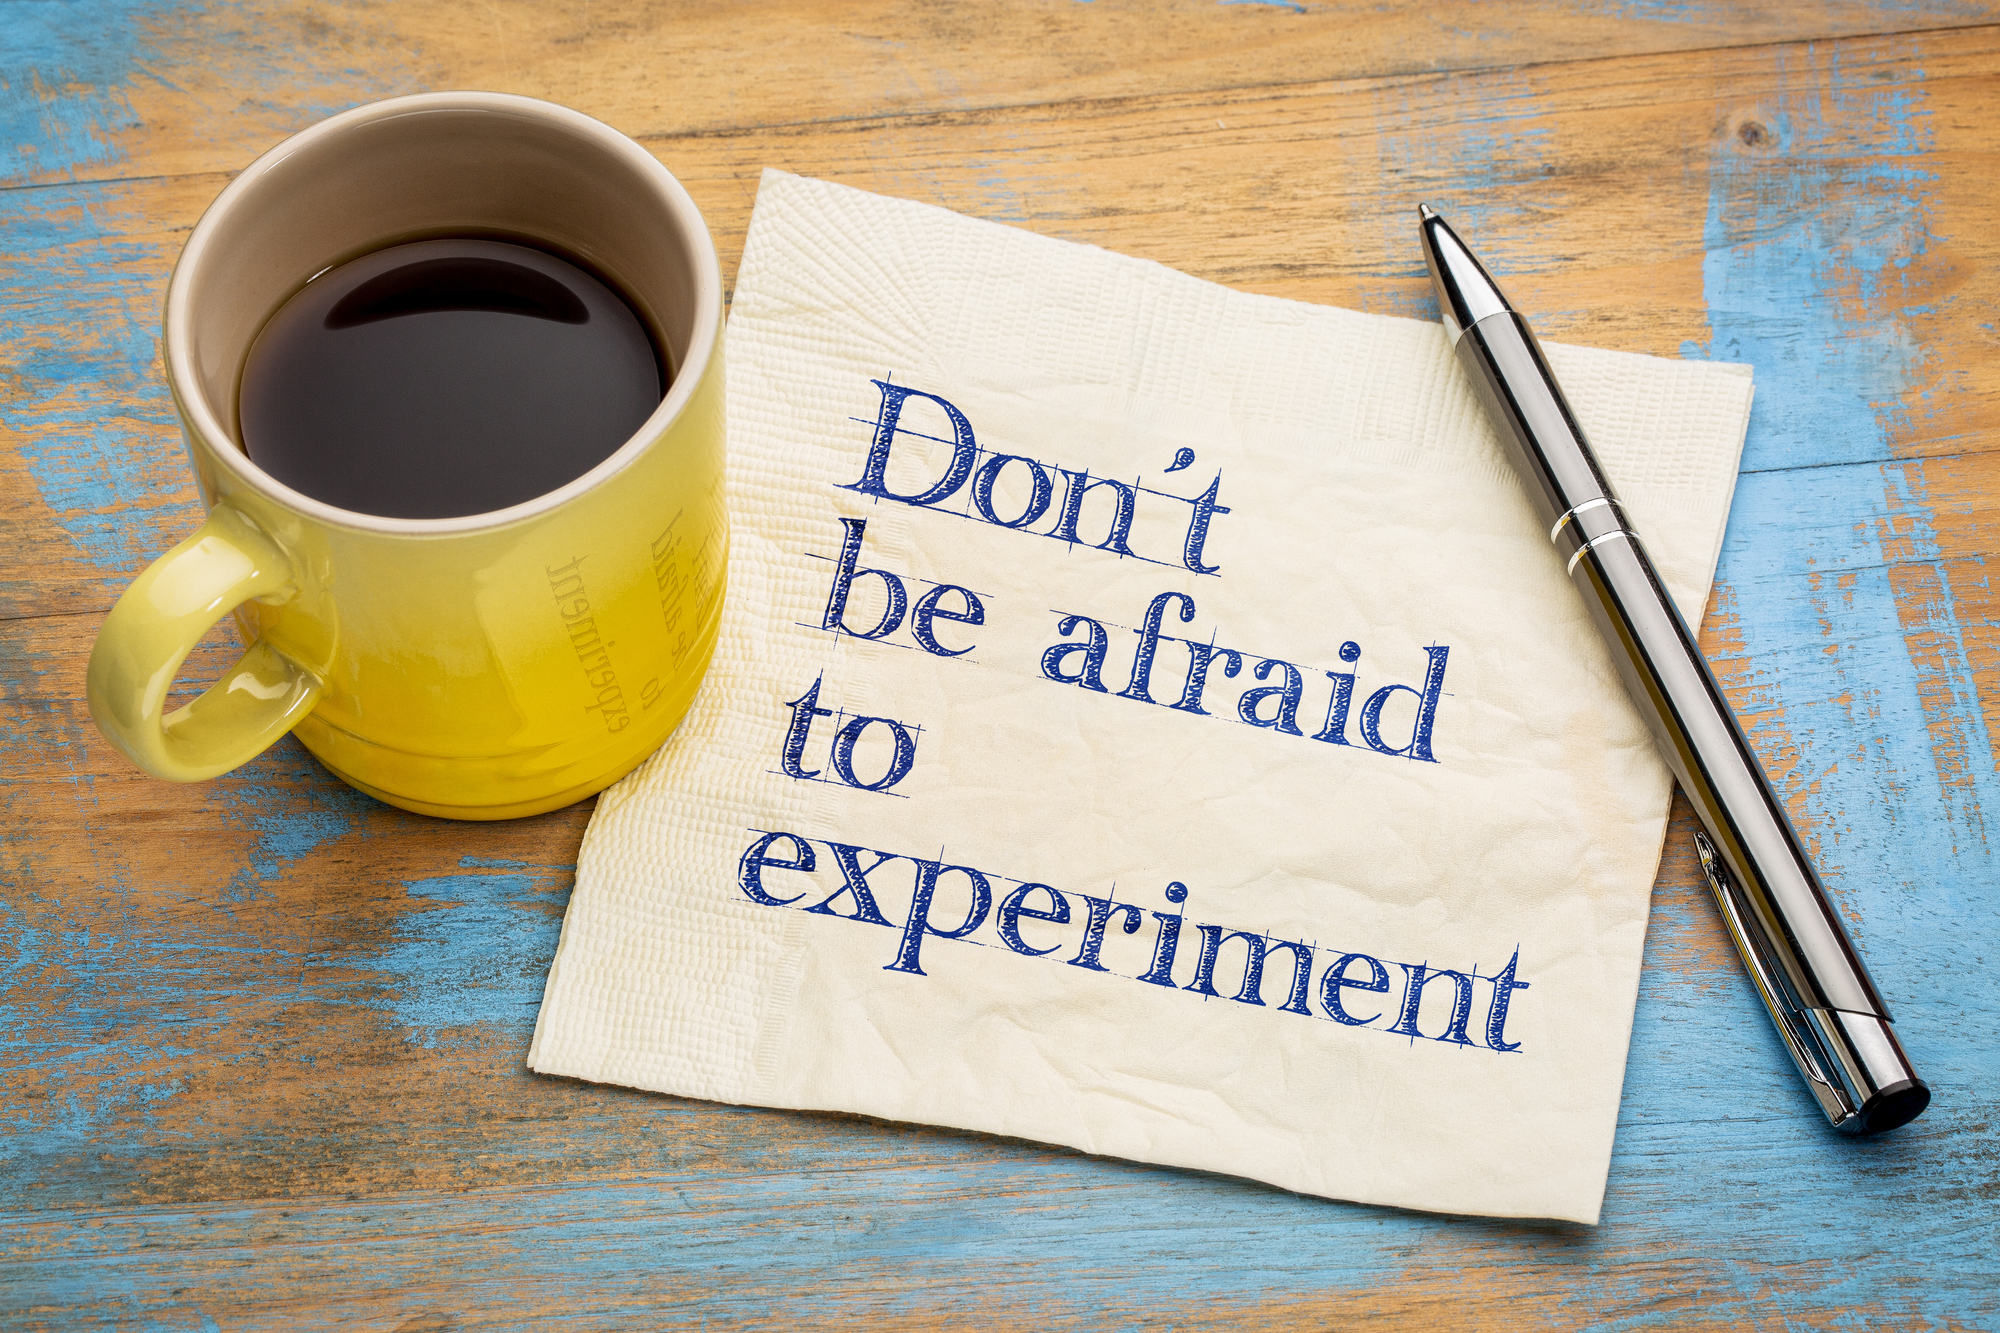 Do not be afraid to experiment - handwriting on a napkin with a cup of espresso coffee